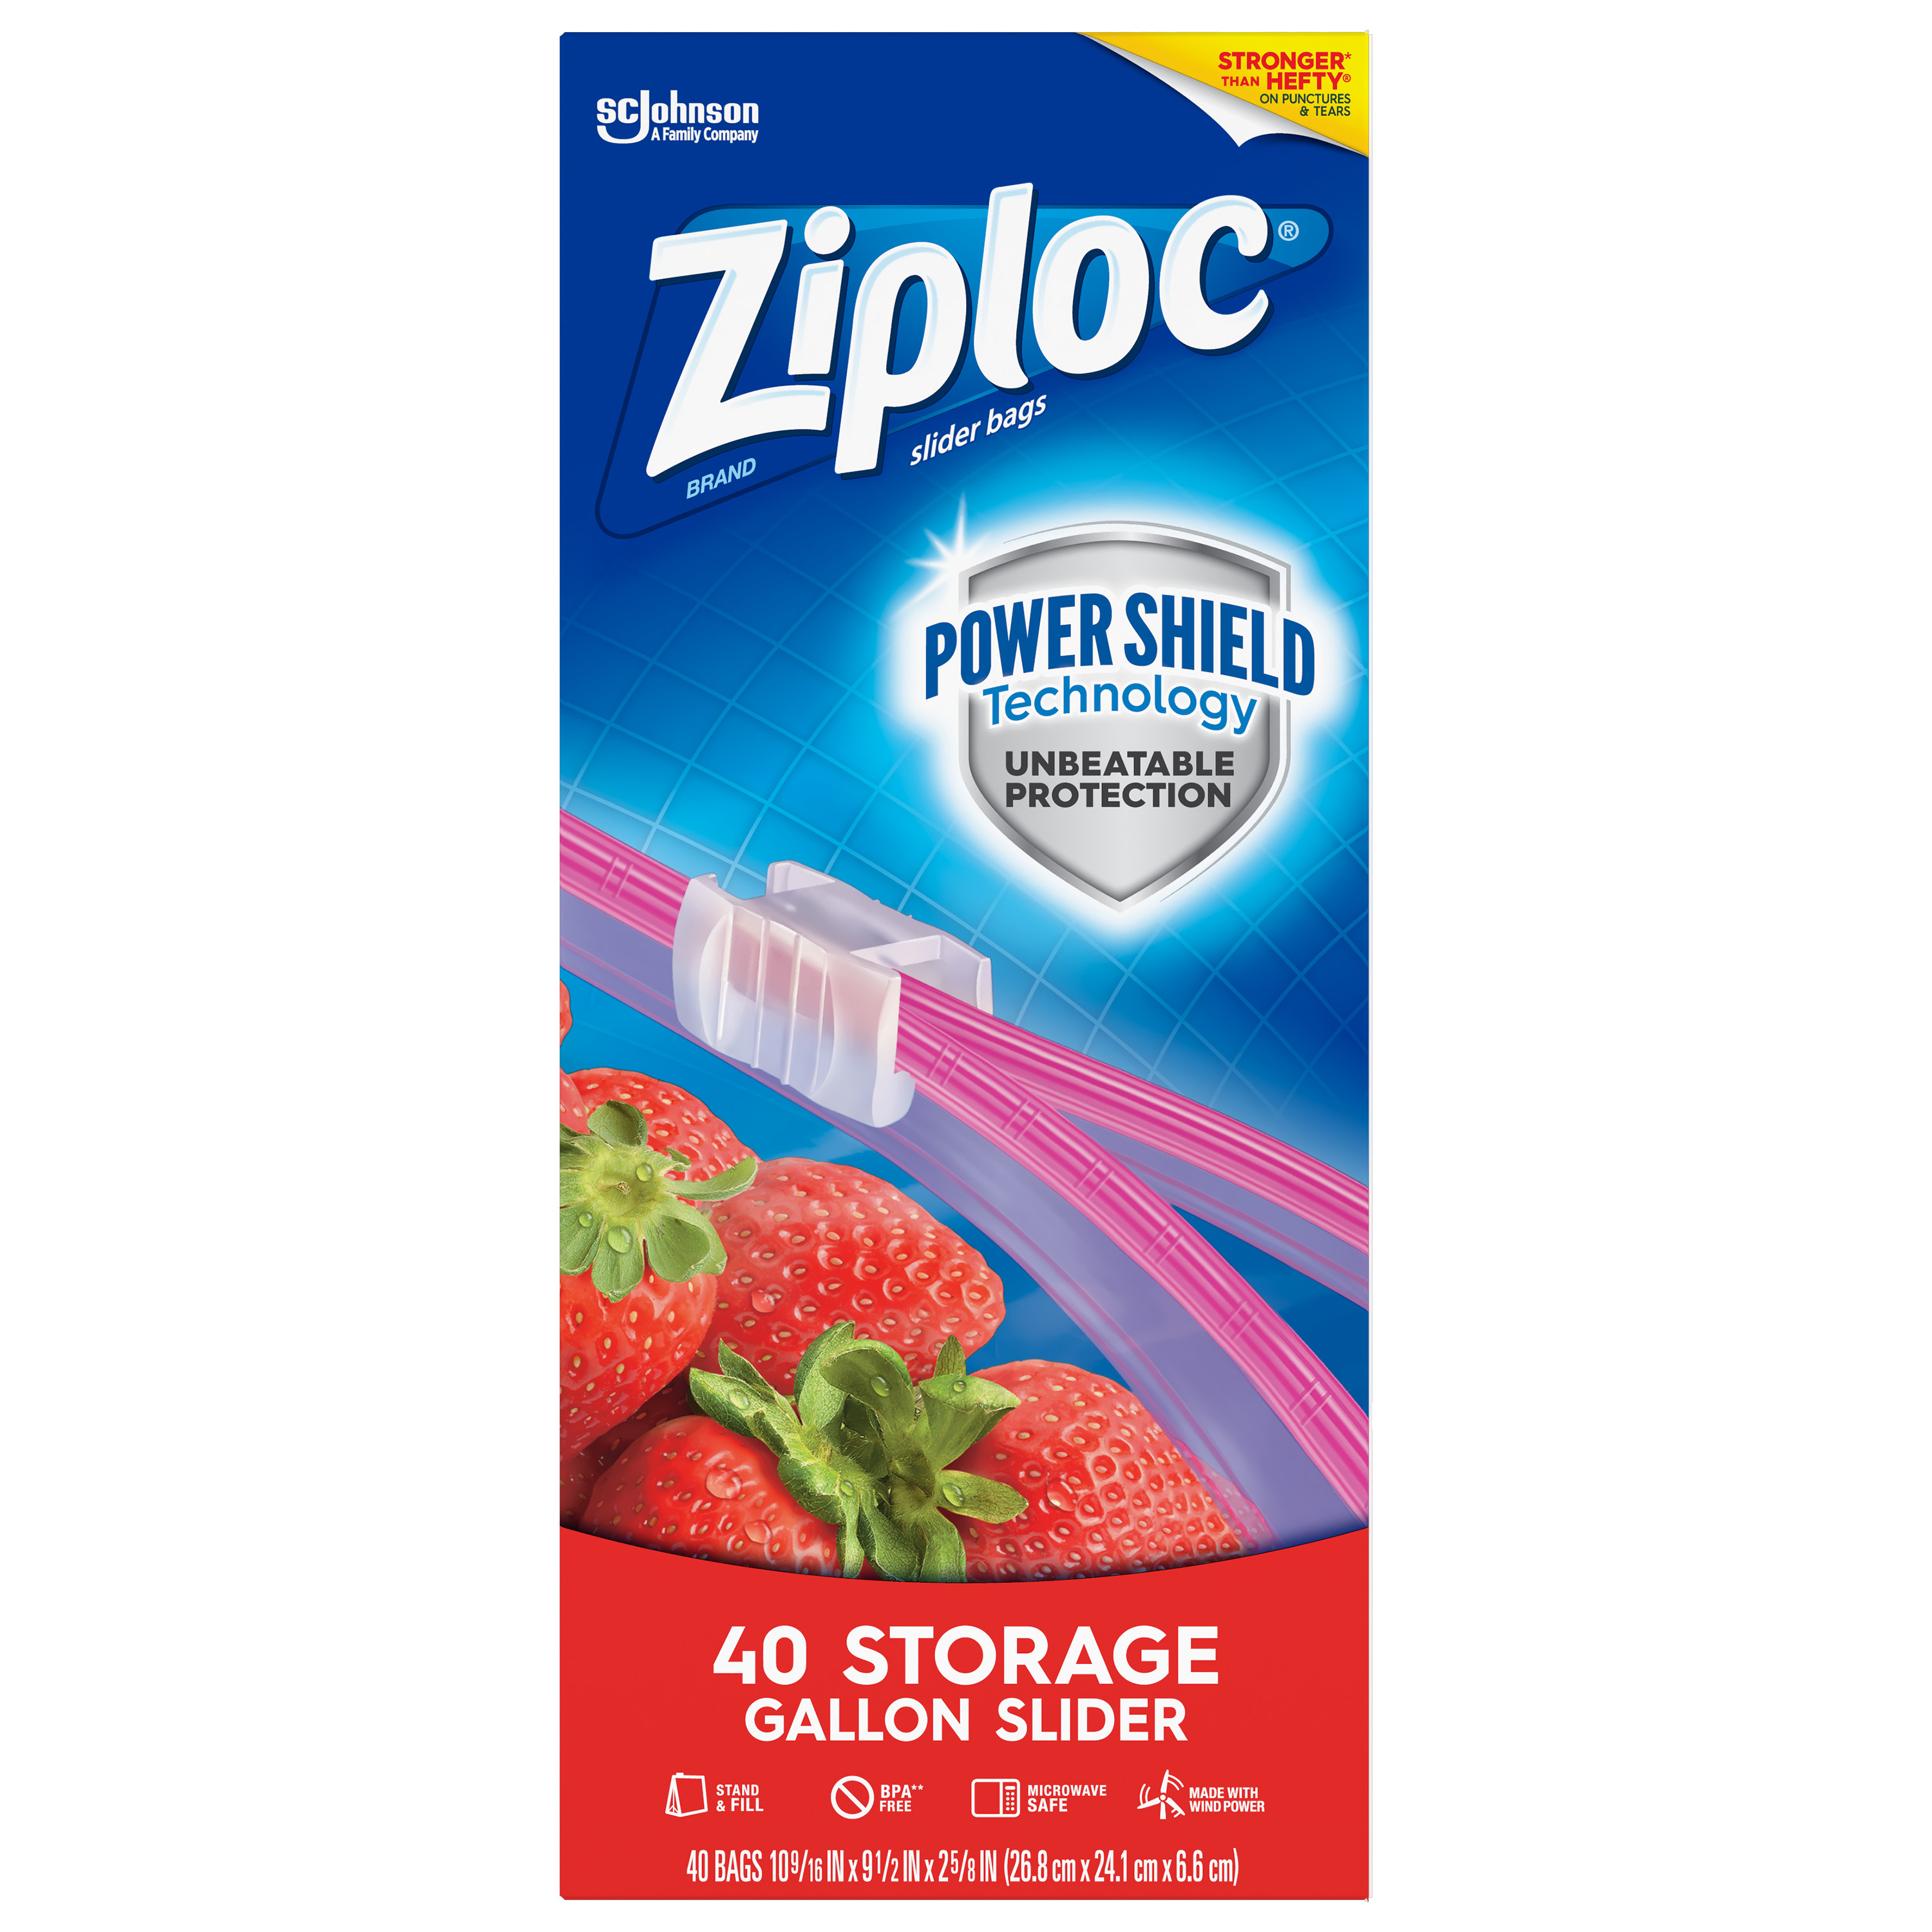 Ziploc Brand Slider Storage Gallon Bags with Power Shield Technology, 40 Count - image 5 of 11